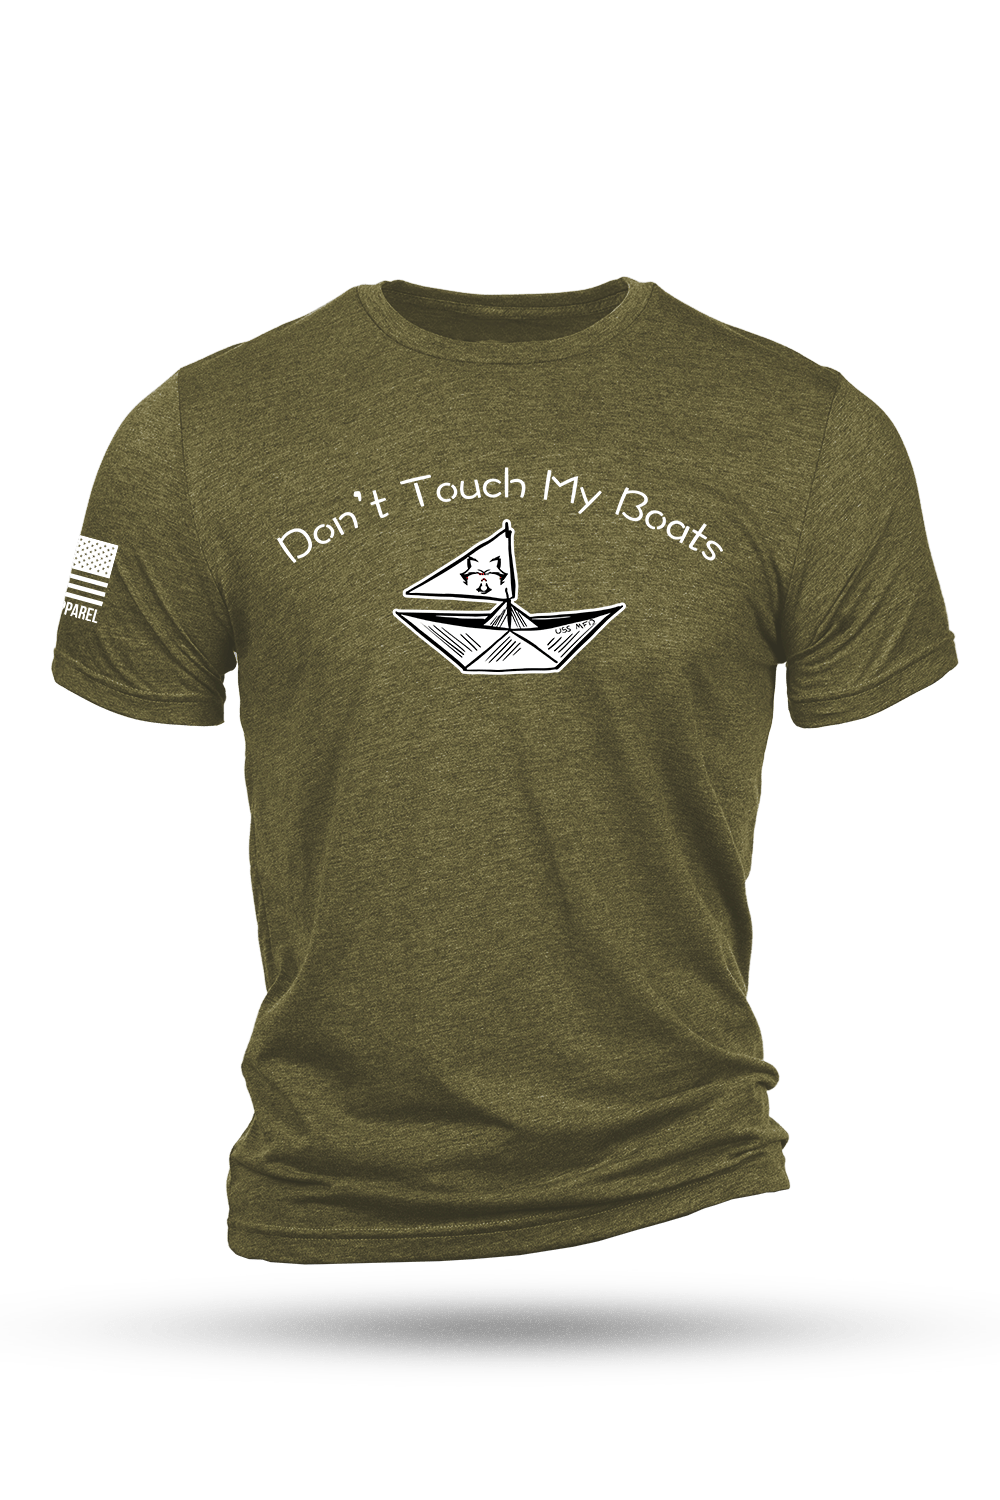 Tri-Blend T-Shirt - Don't touch my boats